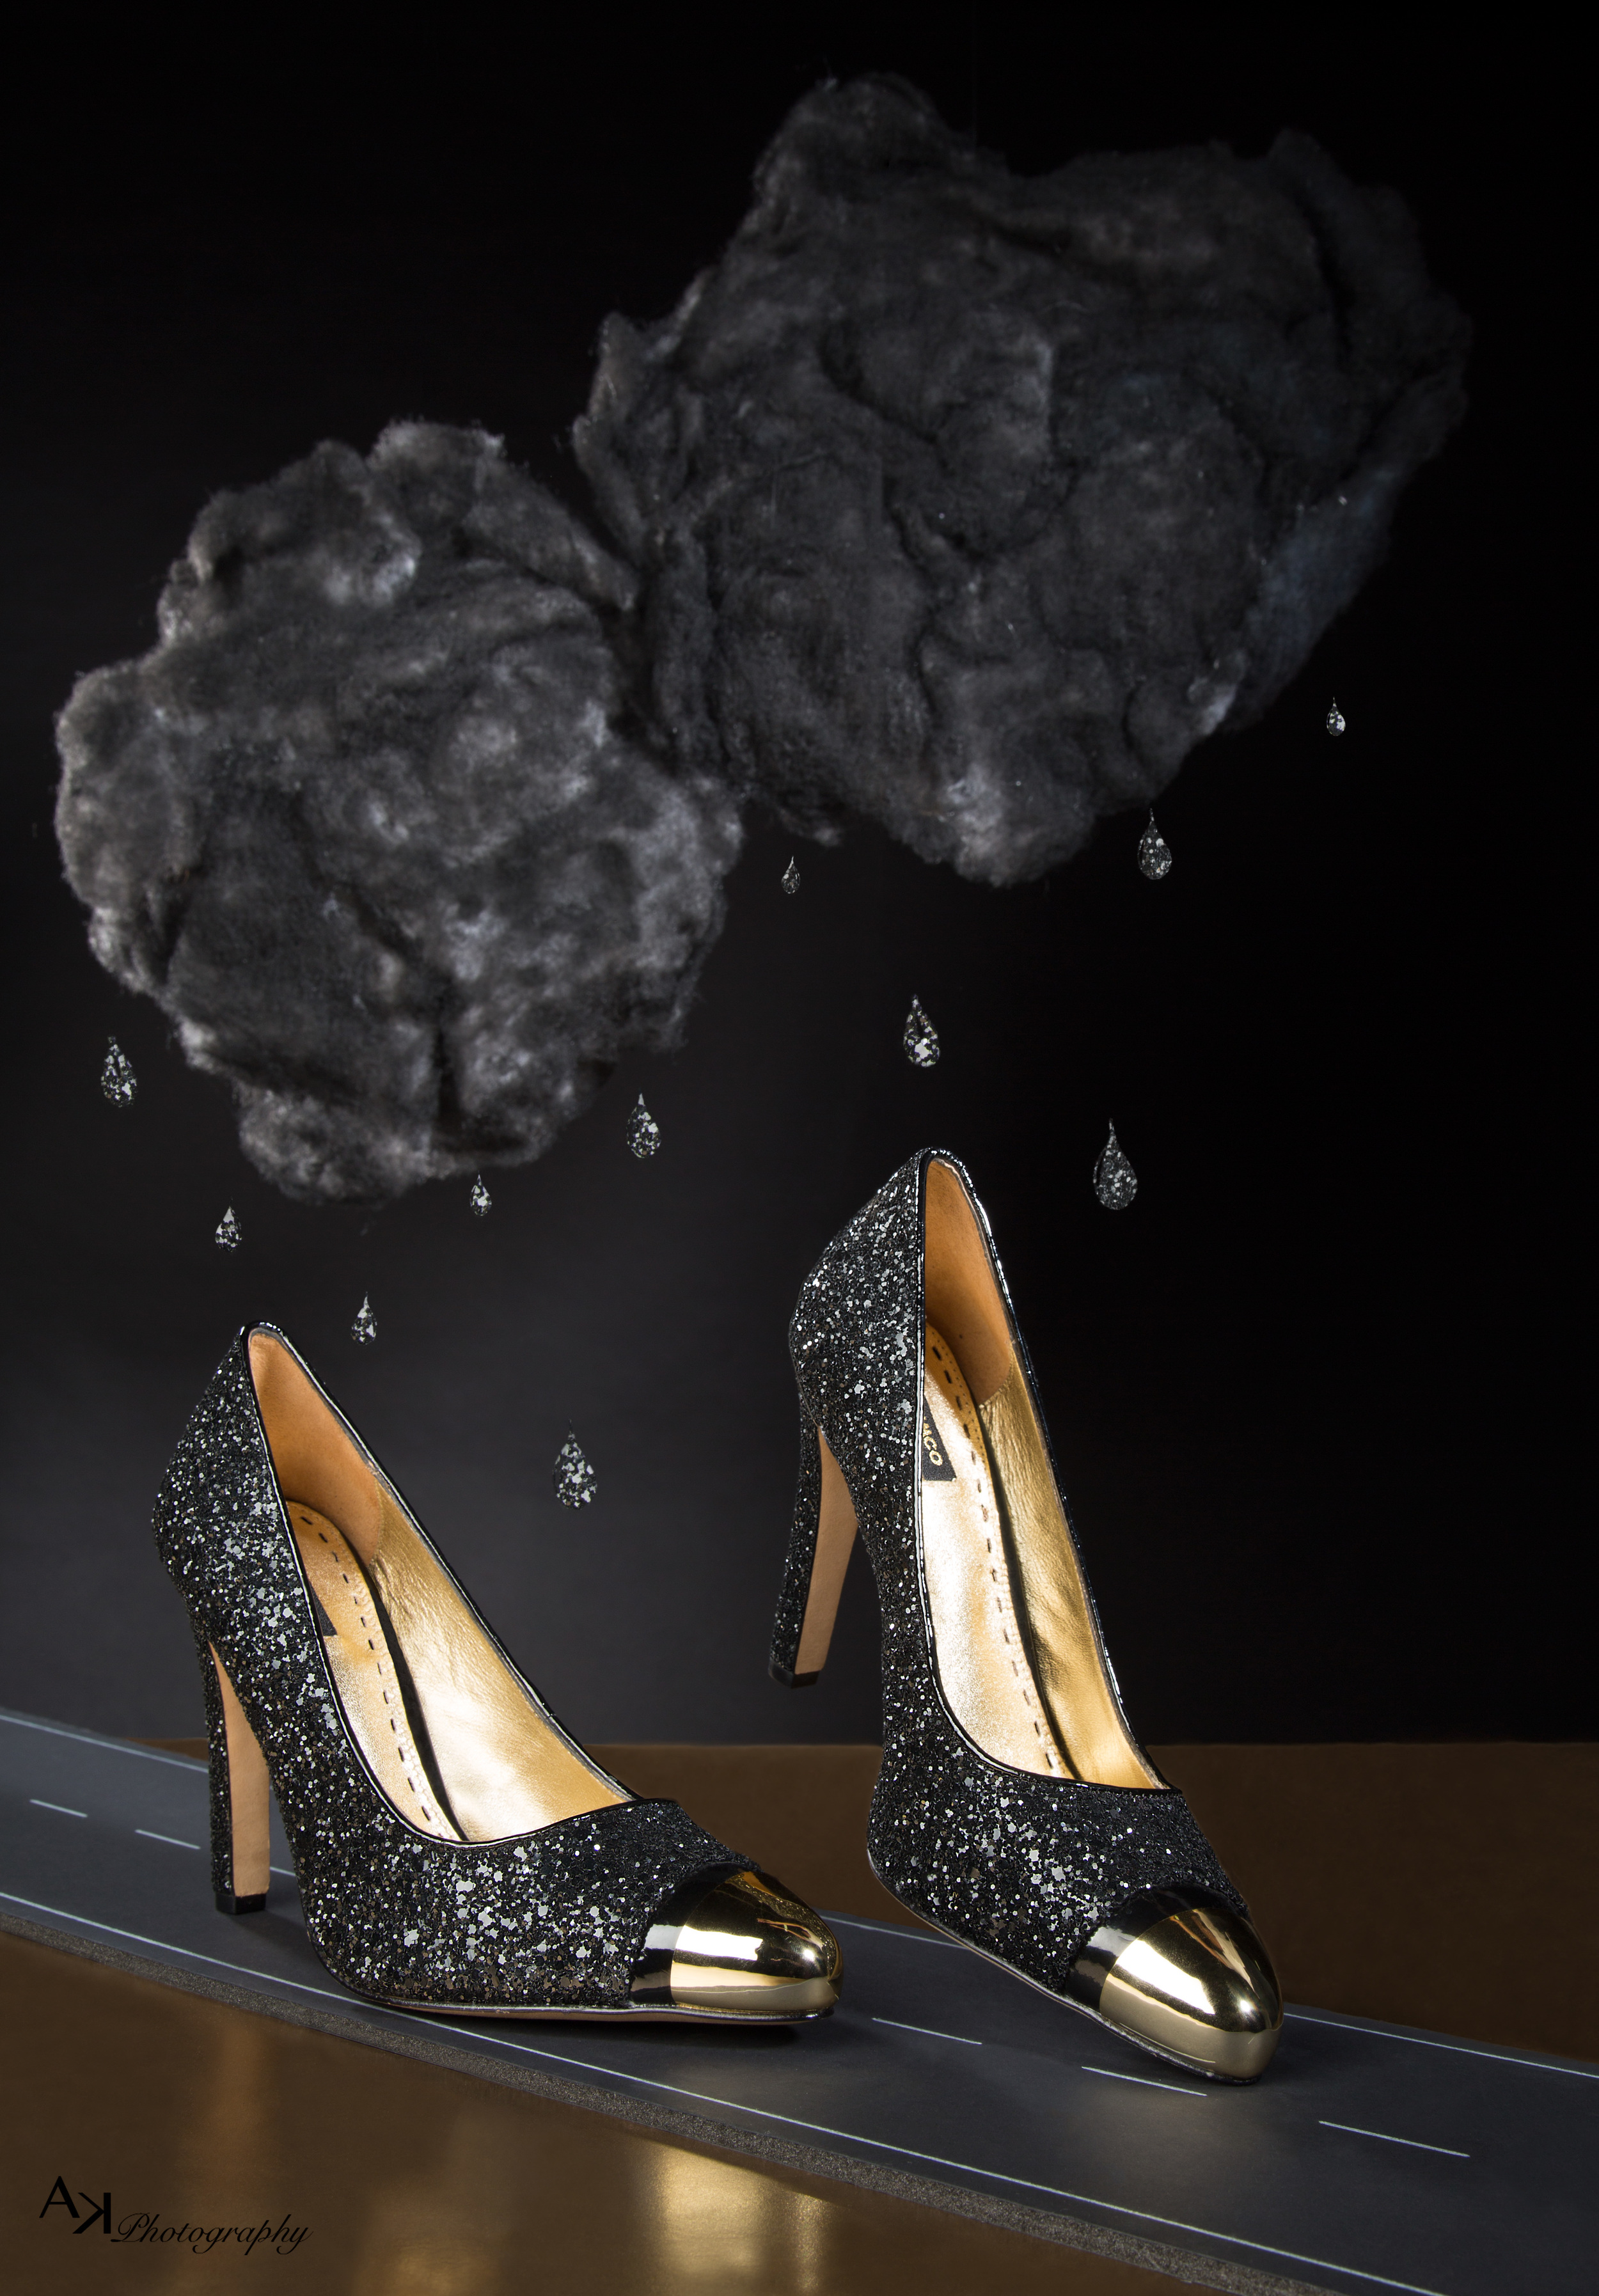  Luxury Shoe Campaign: "Take Me Where I'm Going" #1 Golden Desert Style 